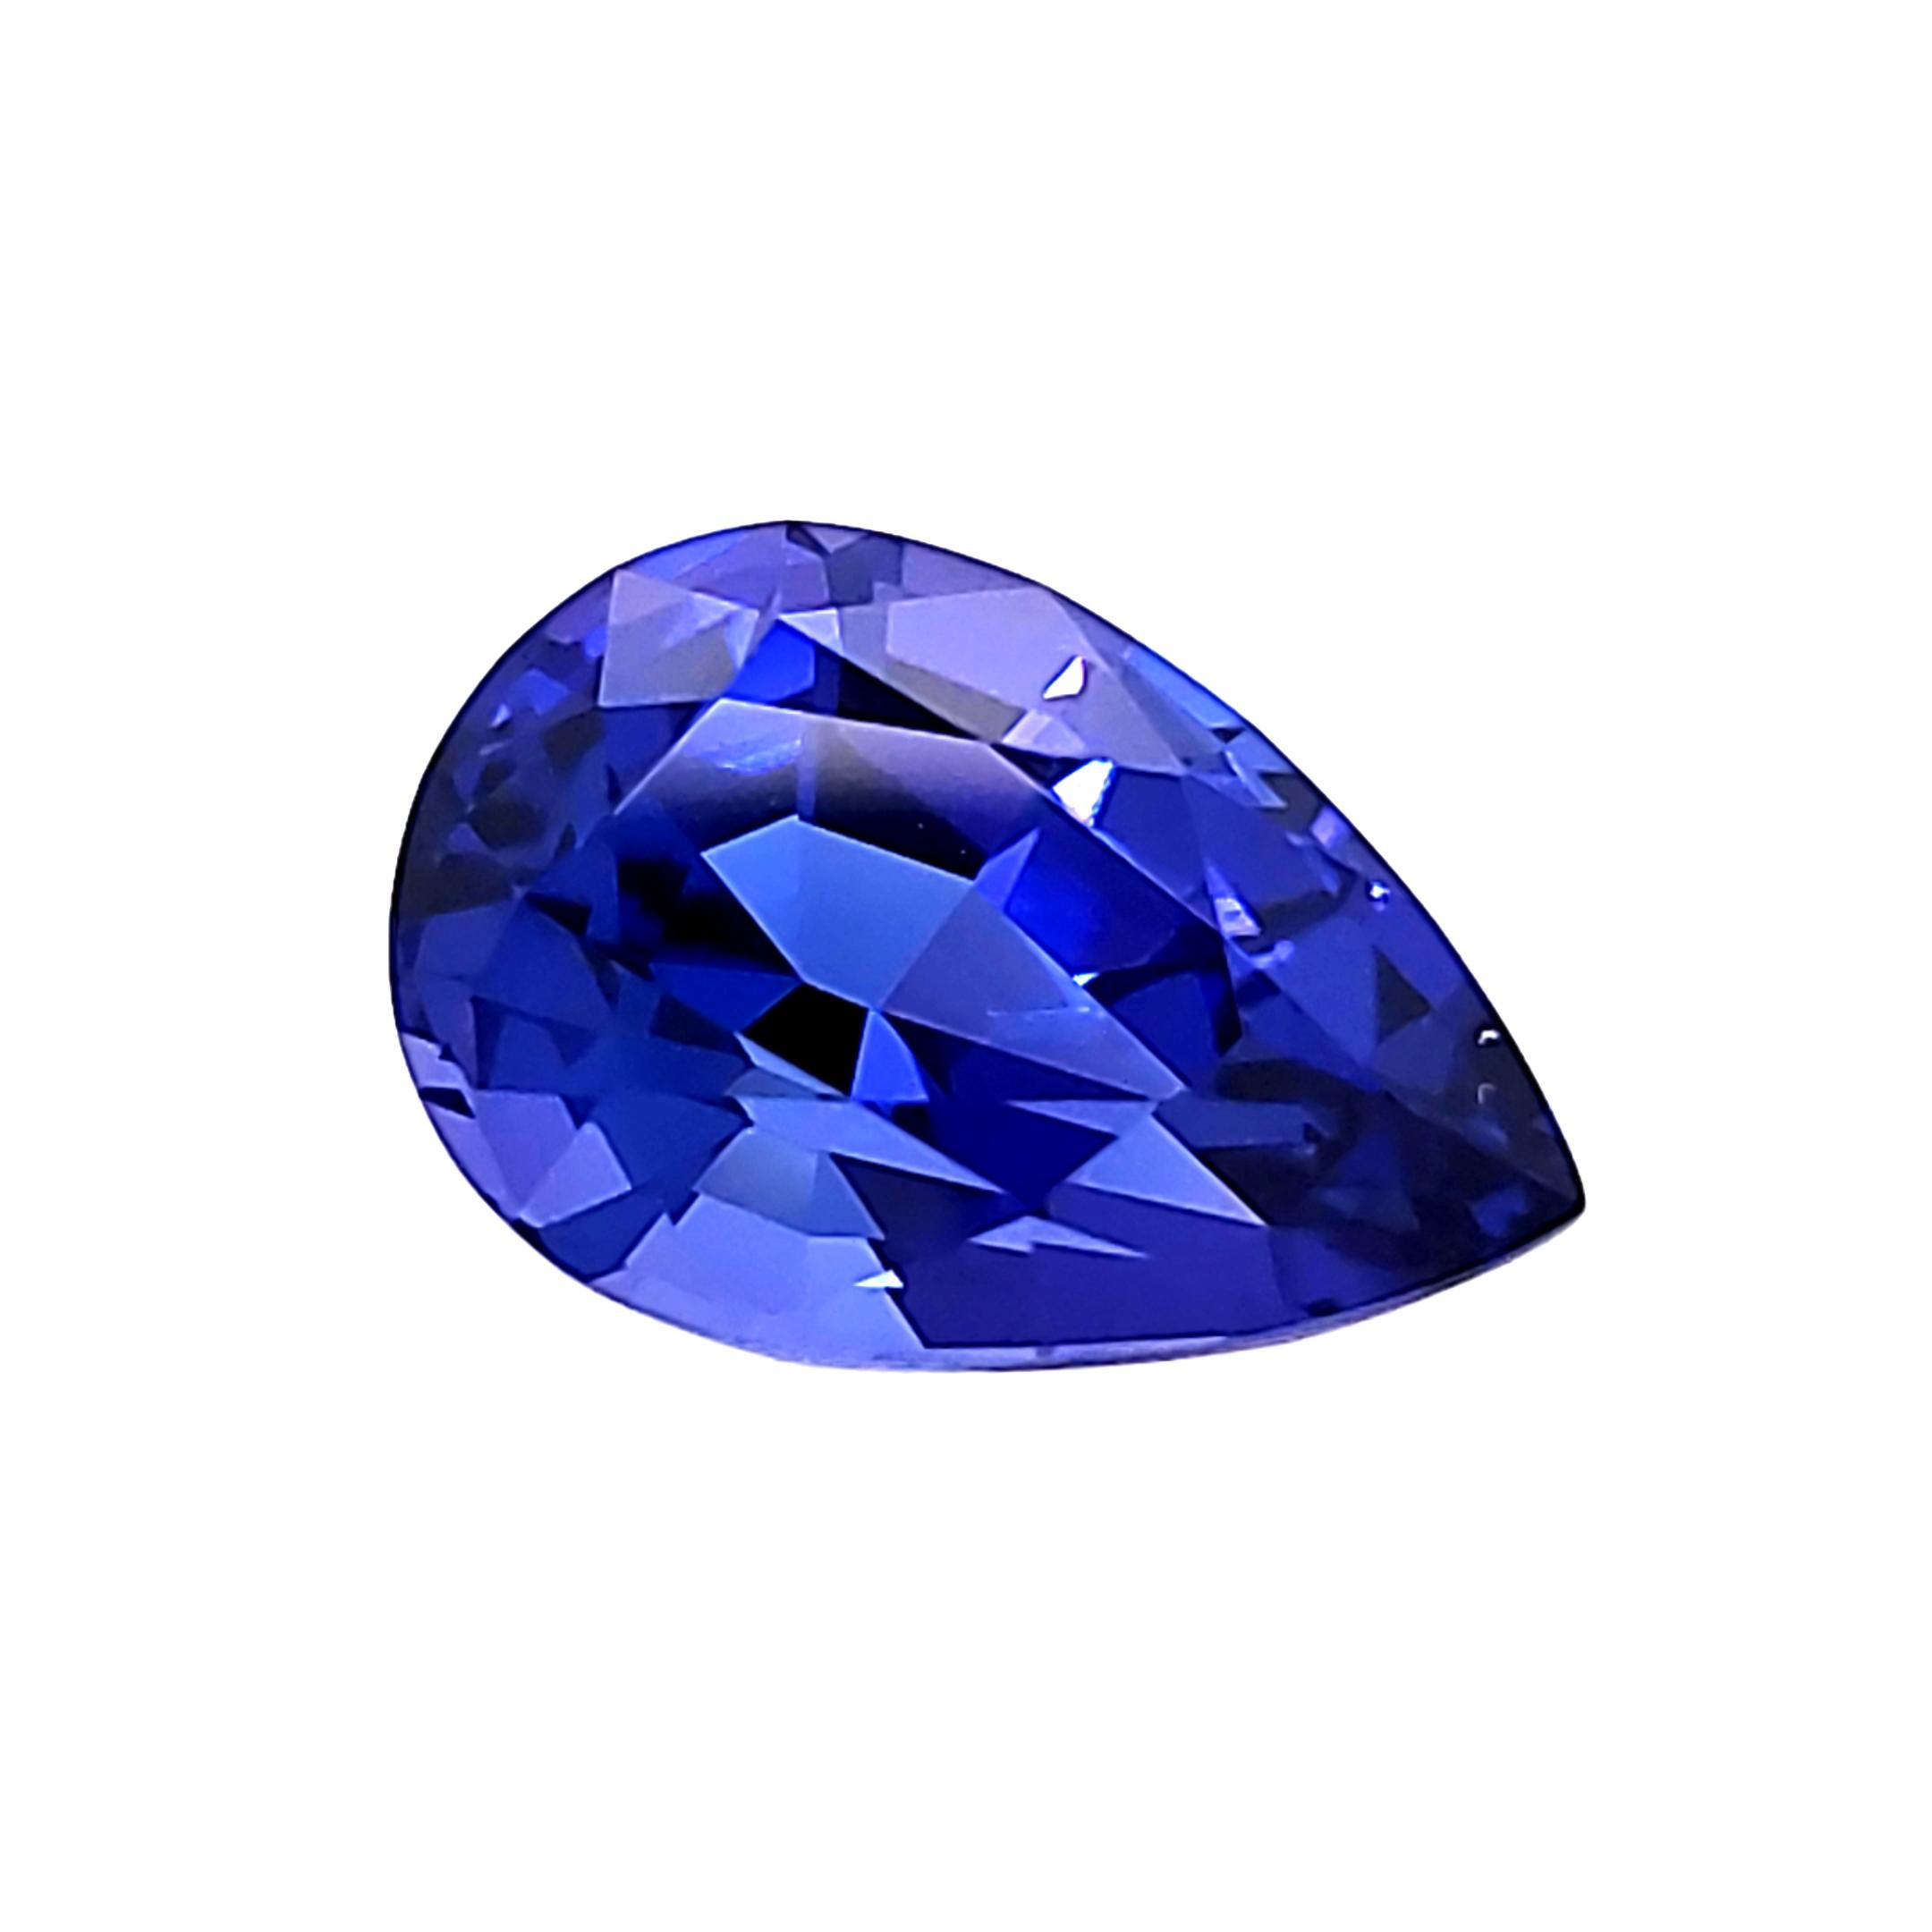 Killer Glowing Blue 7.69ct Tanzanite - Perfect for a Ring or a Pendant In New Condition For Sale In Methuen, MA